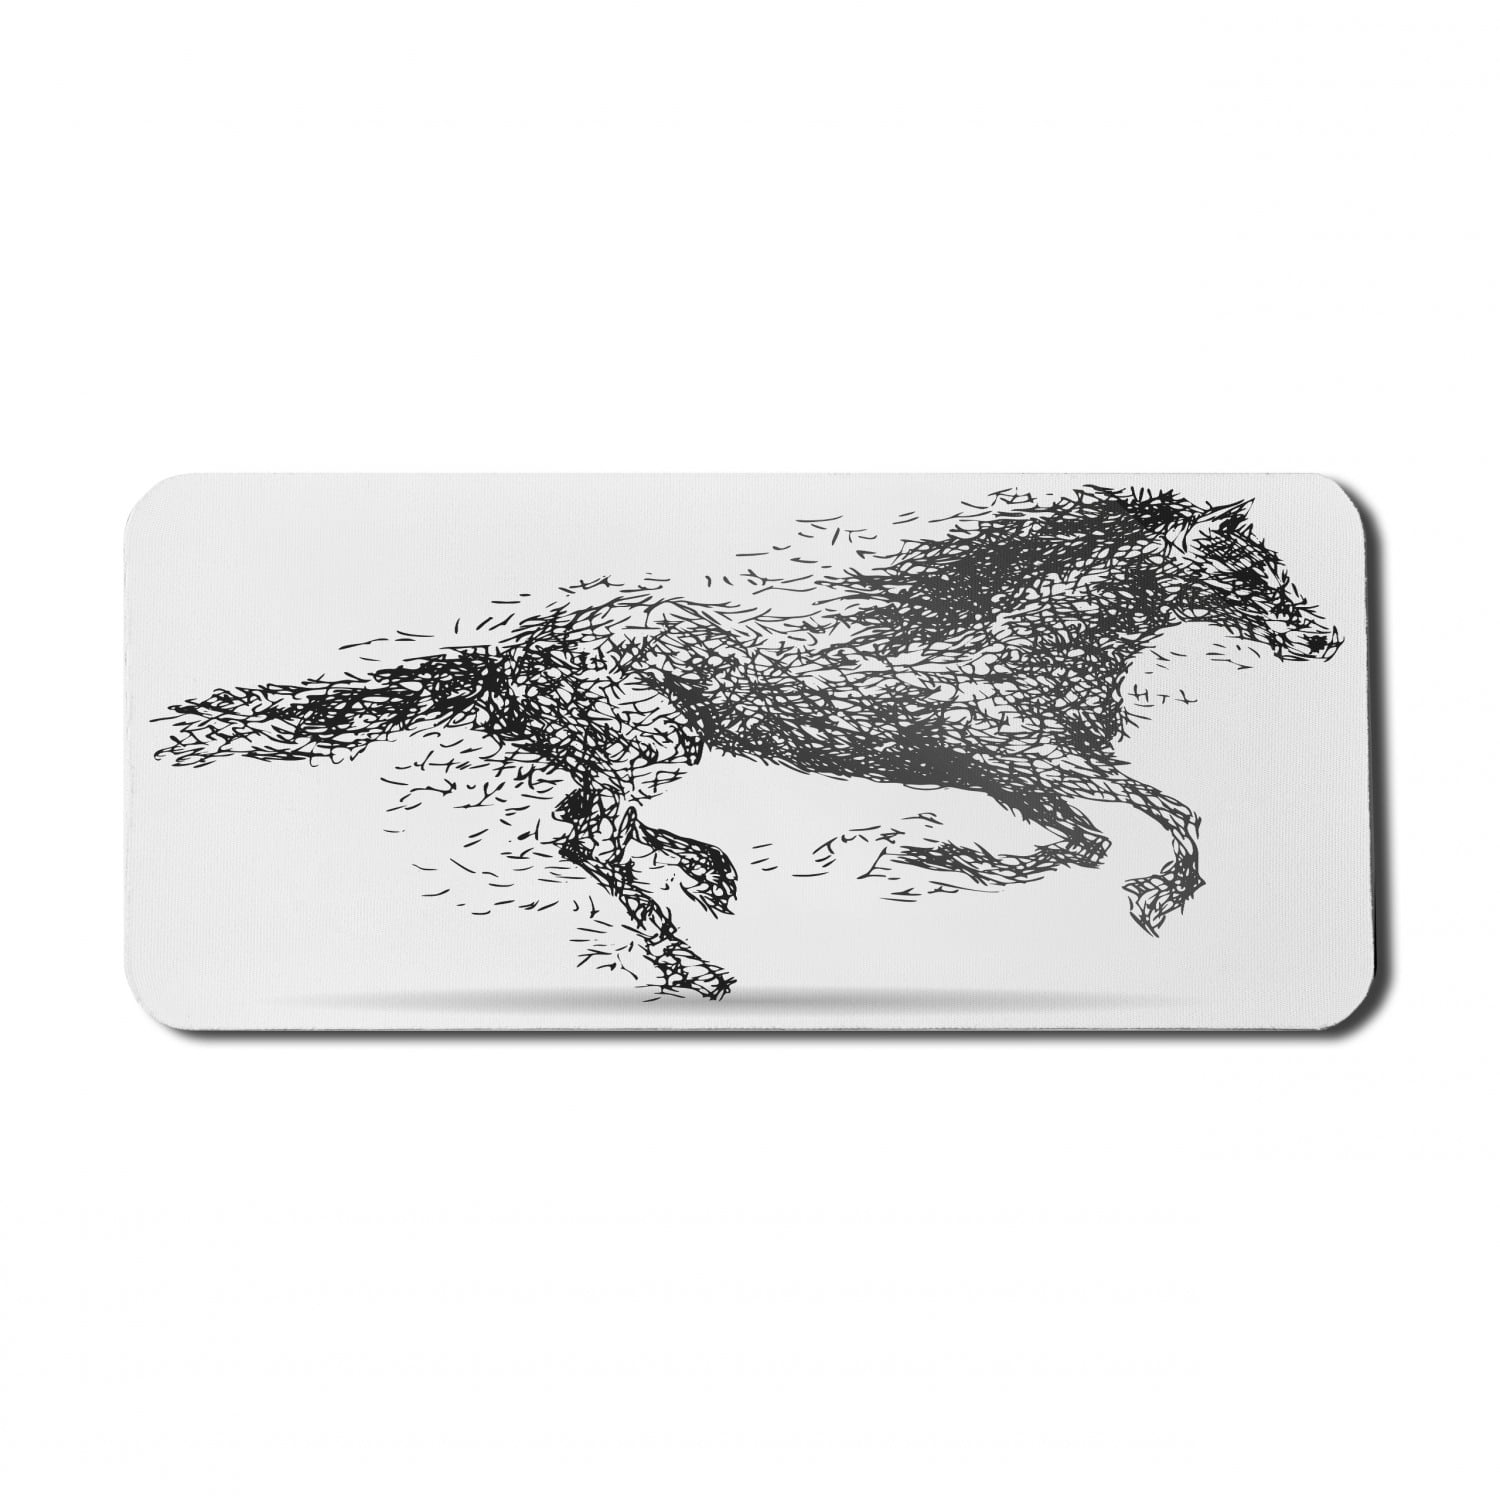 Running Horse Anti-Slip Mouse Pad Rubber Gaming Mice Mat For Optical Laser Mouse 